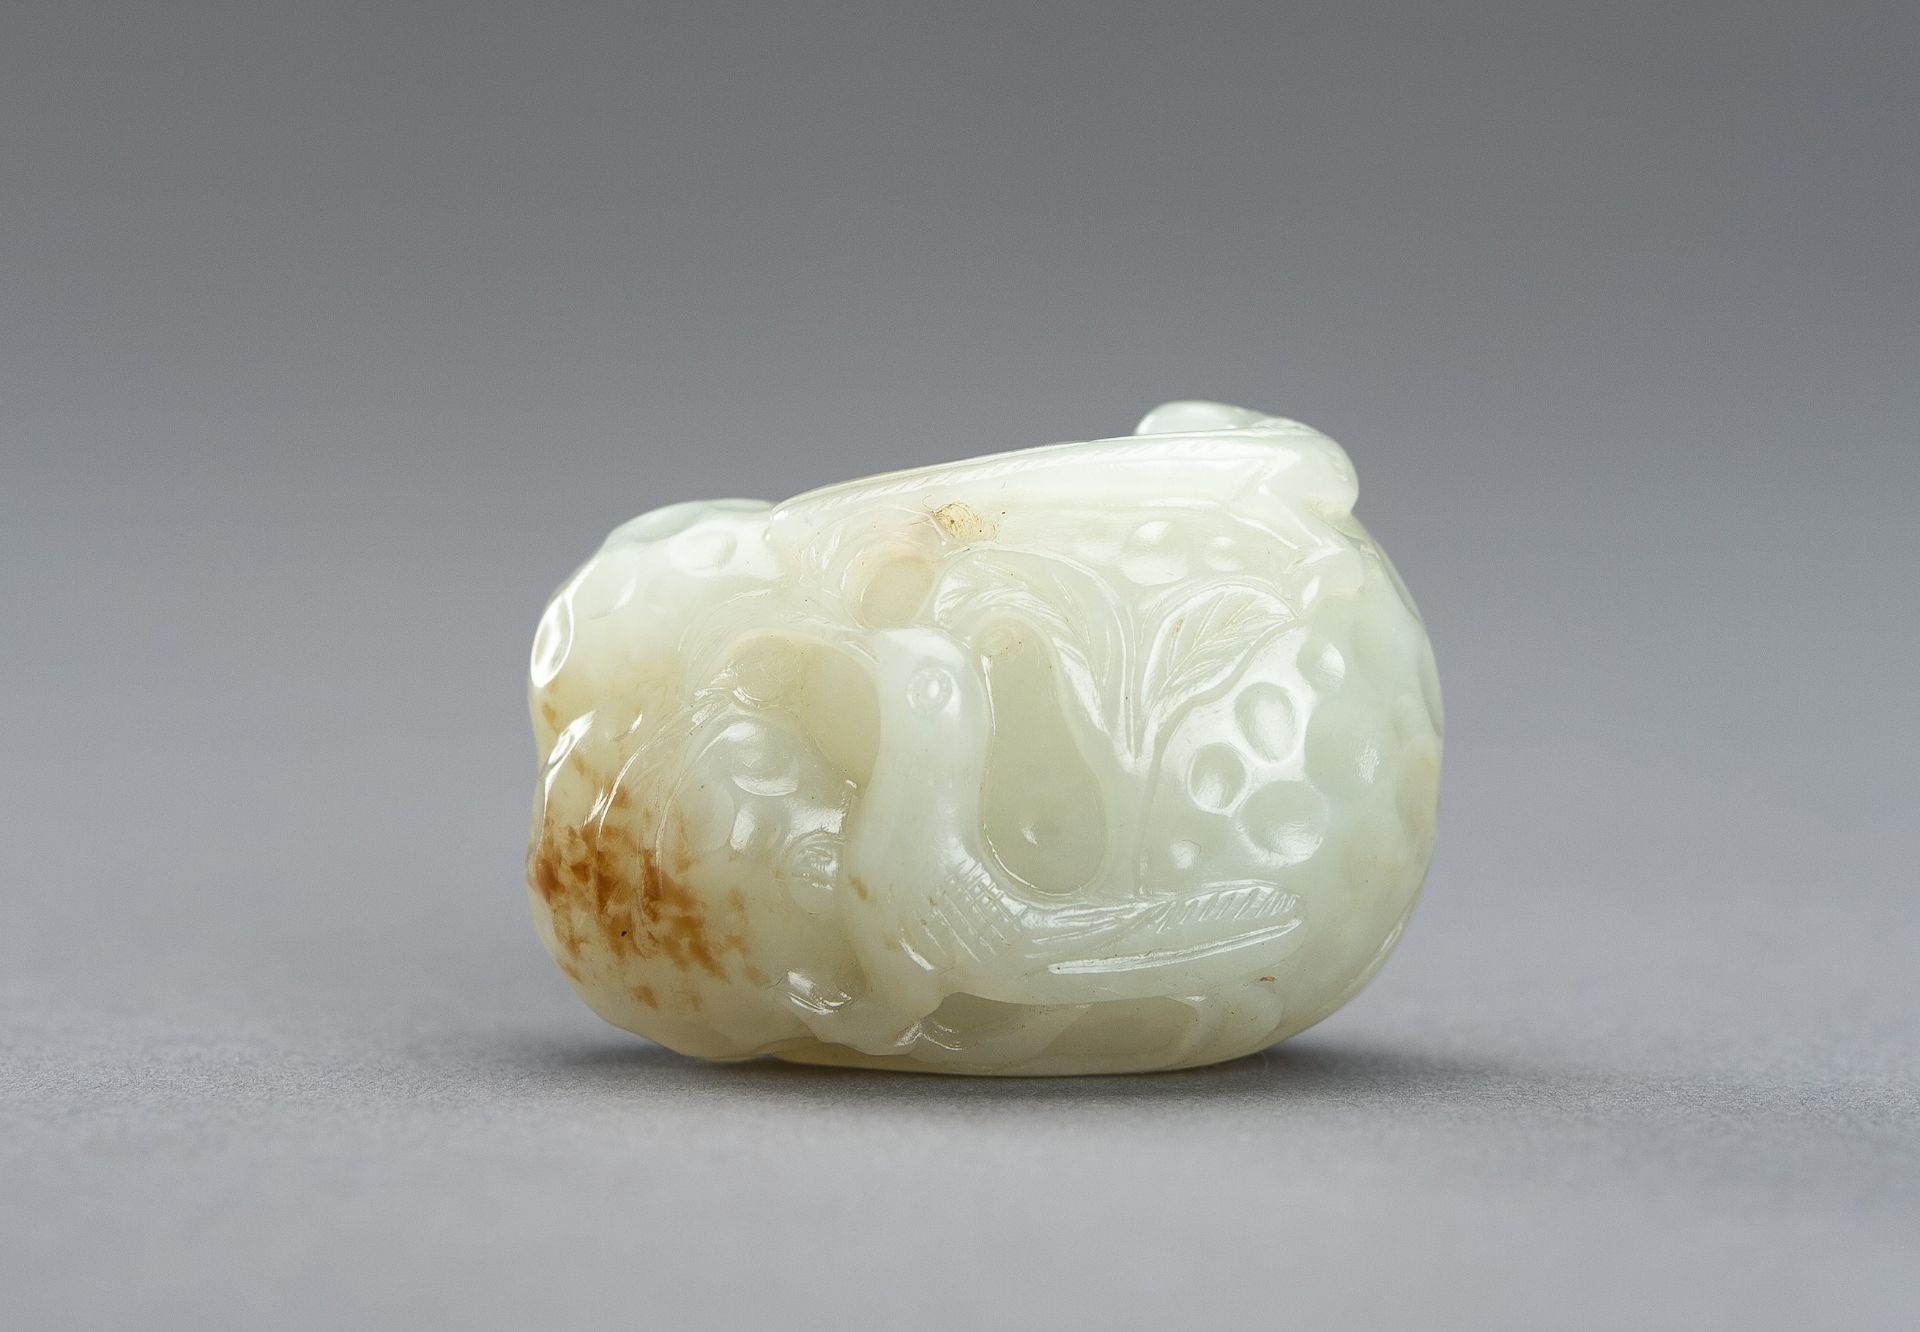 A CELADON JADE PENDANT OF A LYCHEE WITH BIRDS, 1920s